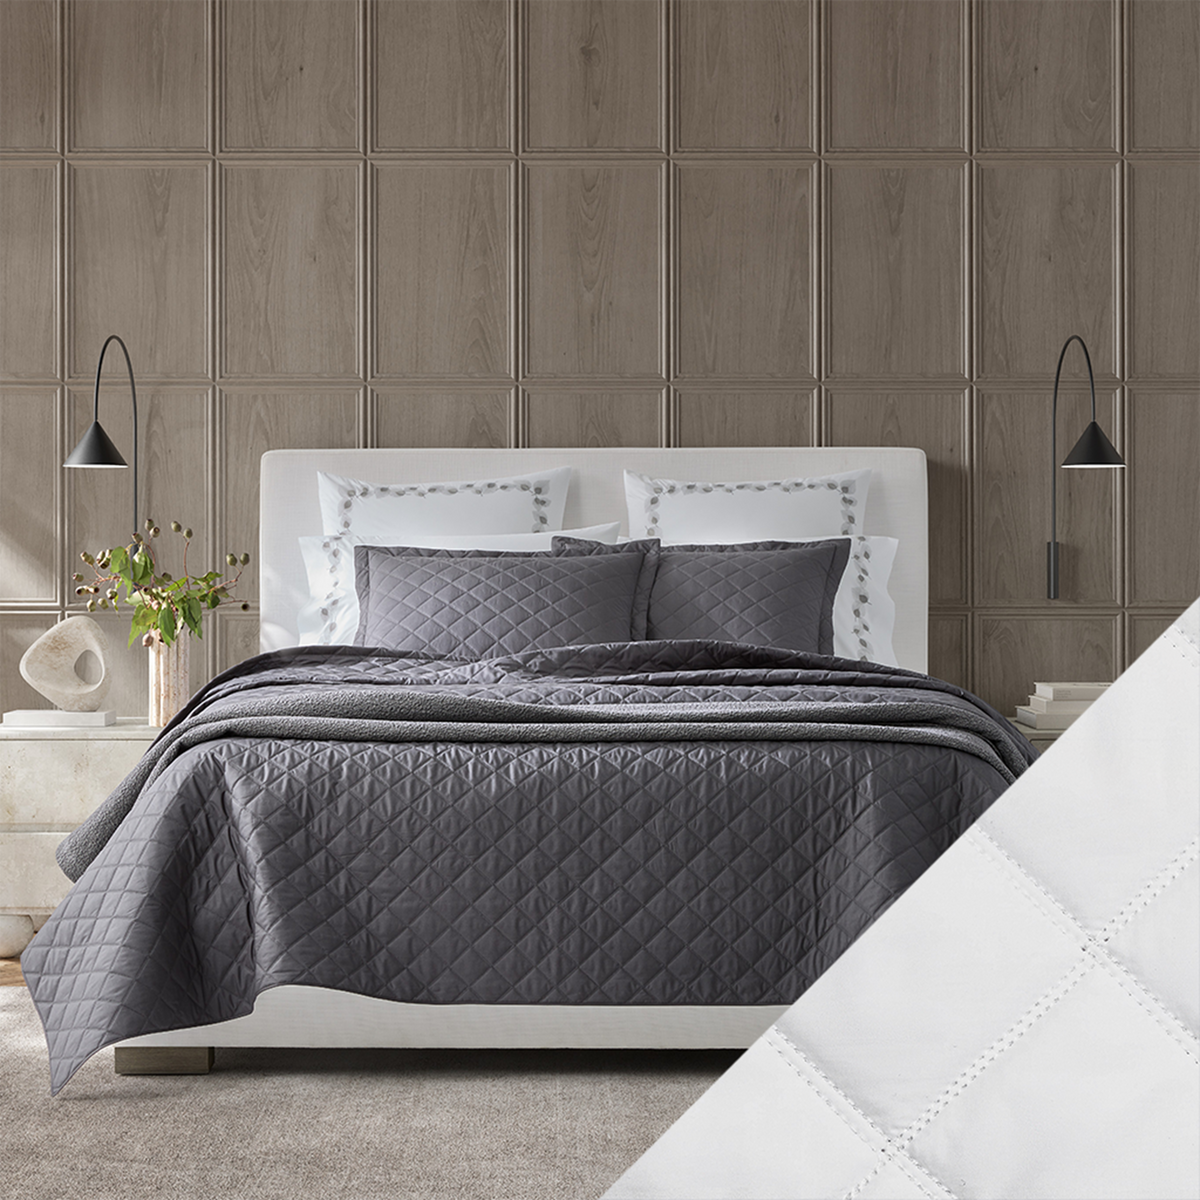 Bed Dressed in Matouk Milano Quilt Bedding with Swatch in Color White